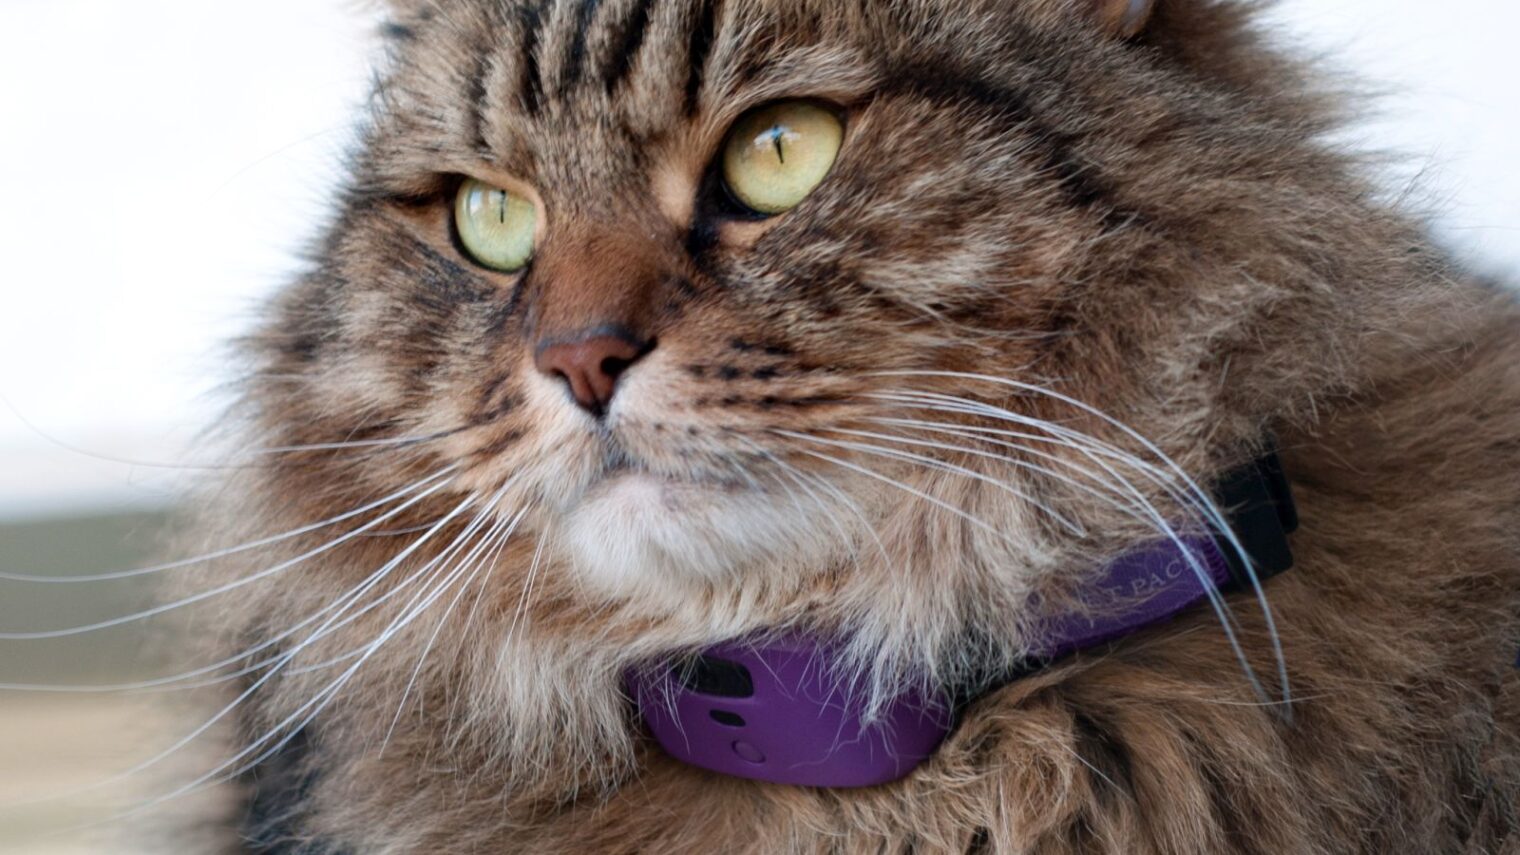 This cat’s owners have a real-time handle on her everyday health. Photo courtesy of PetPace